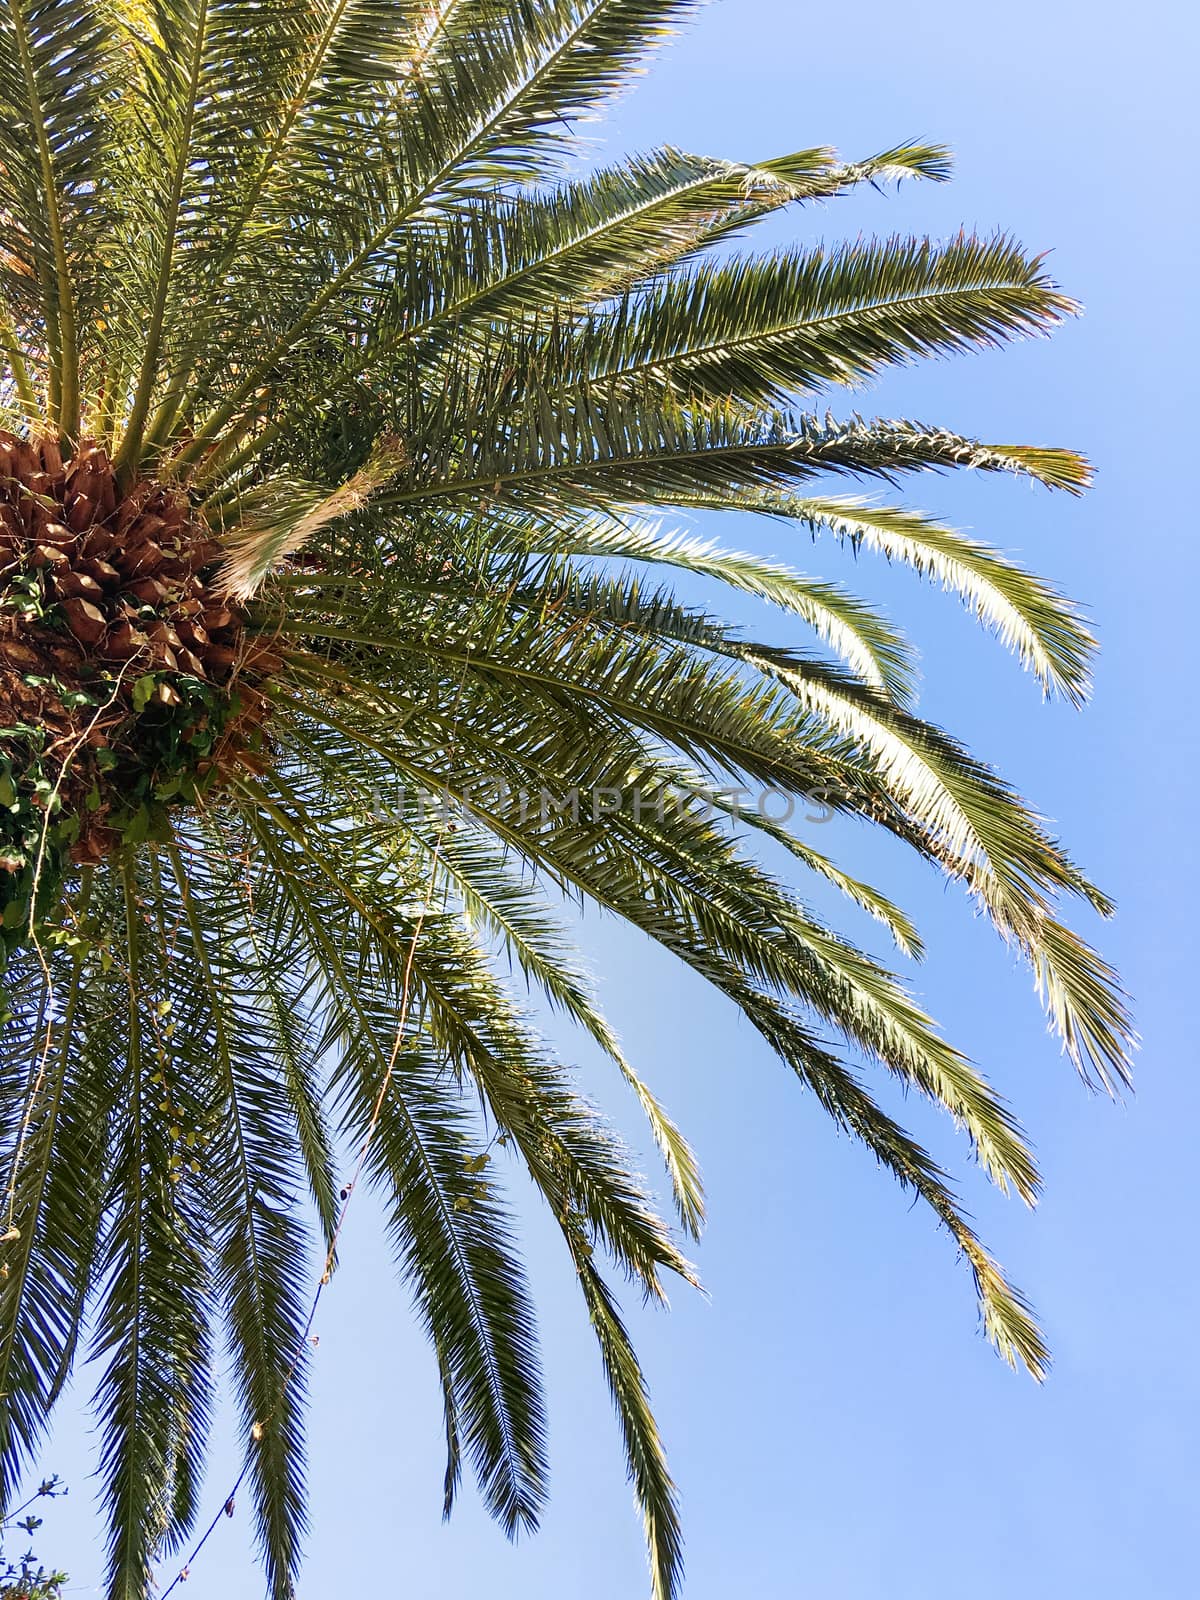 Bottom view on palm tree foliage on clear blue sky background.